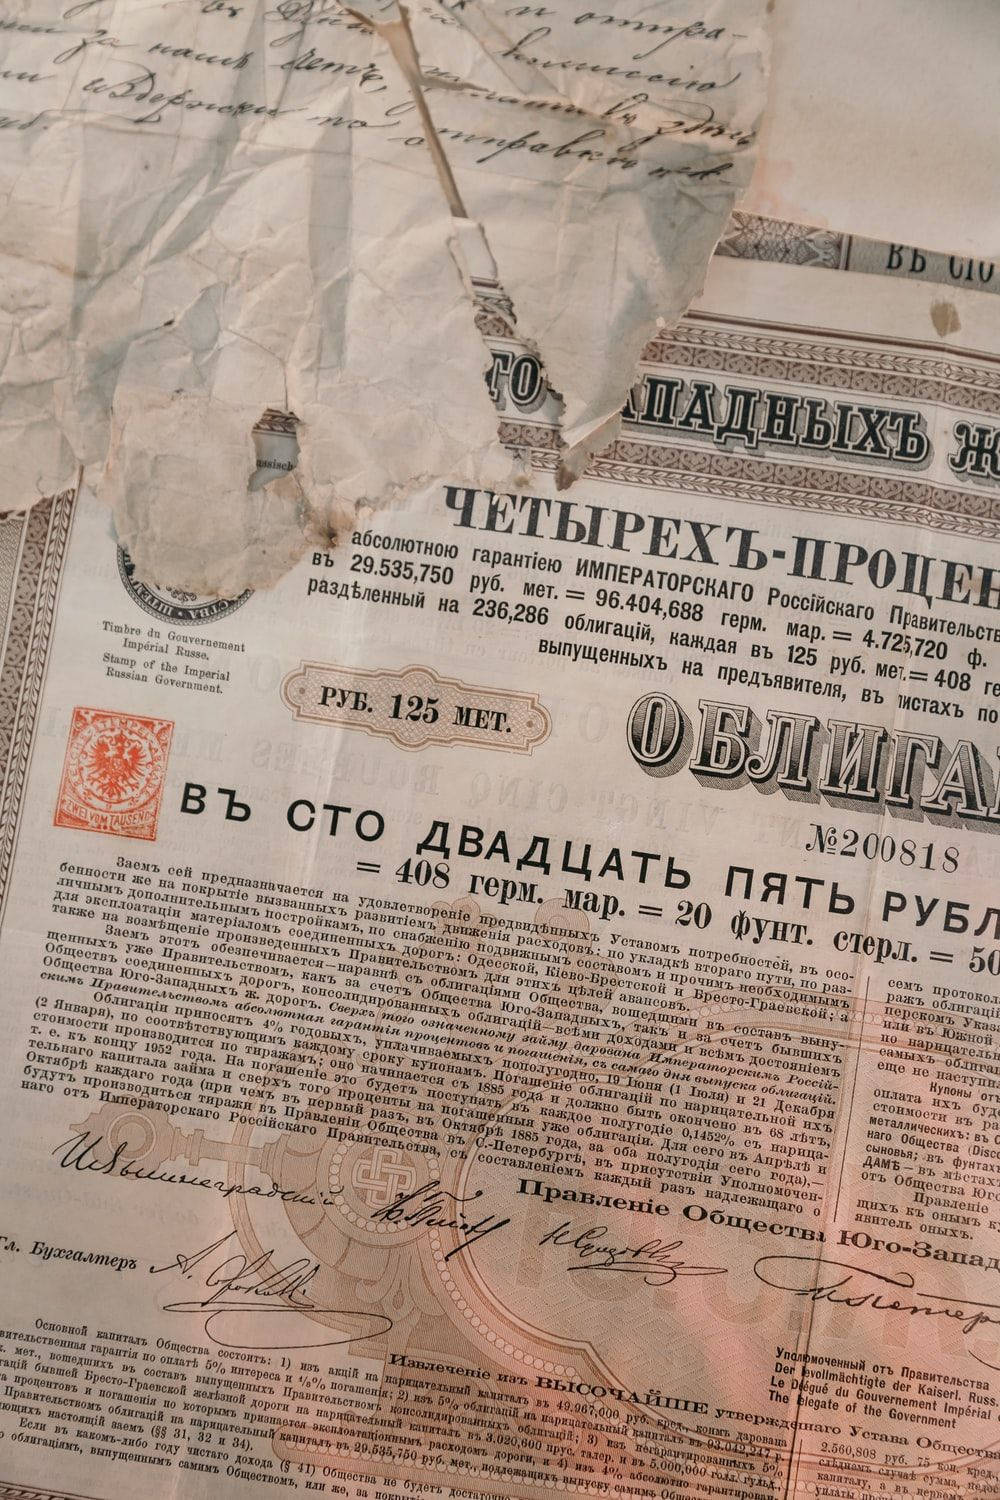 Newspaper Aesthetic Letter And Foreign Newspaper